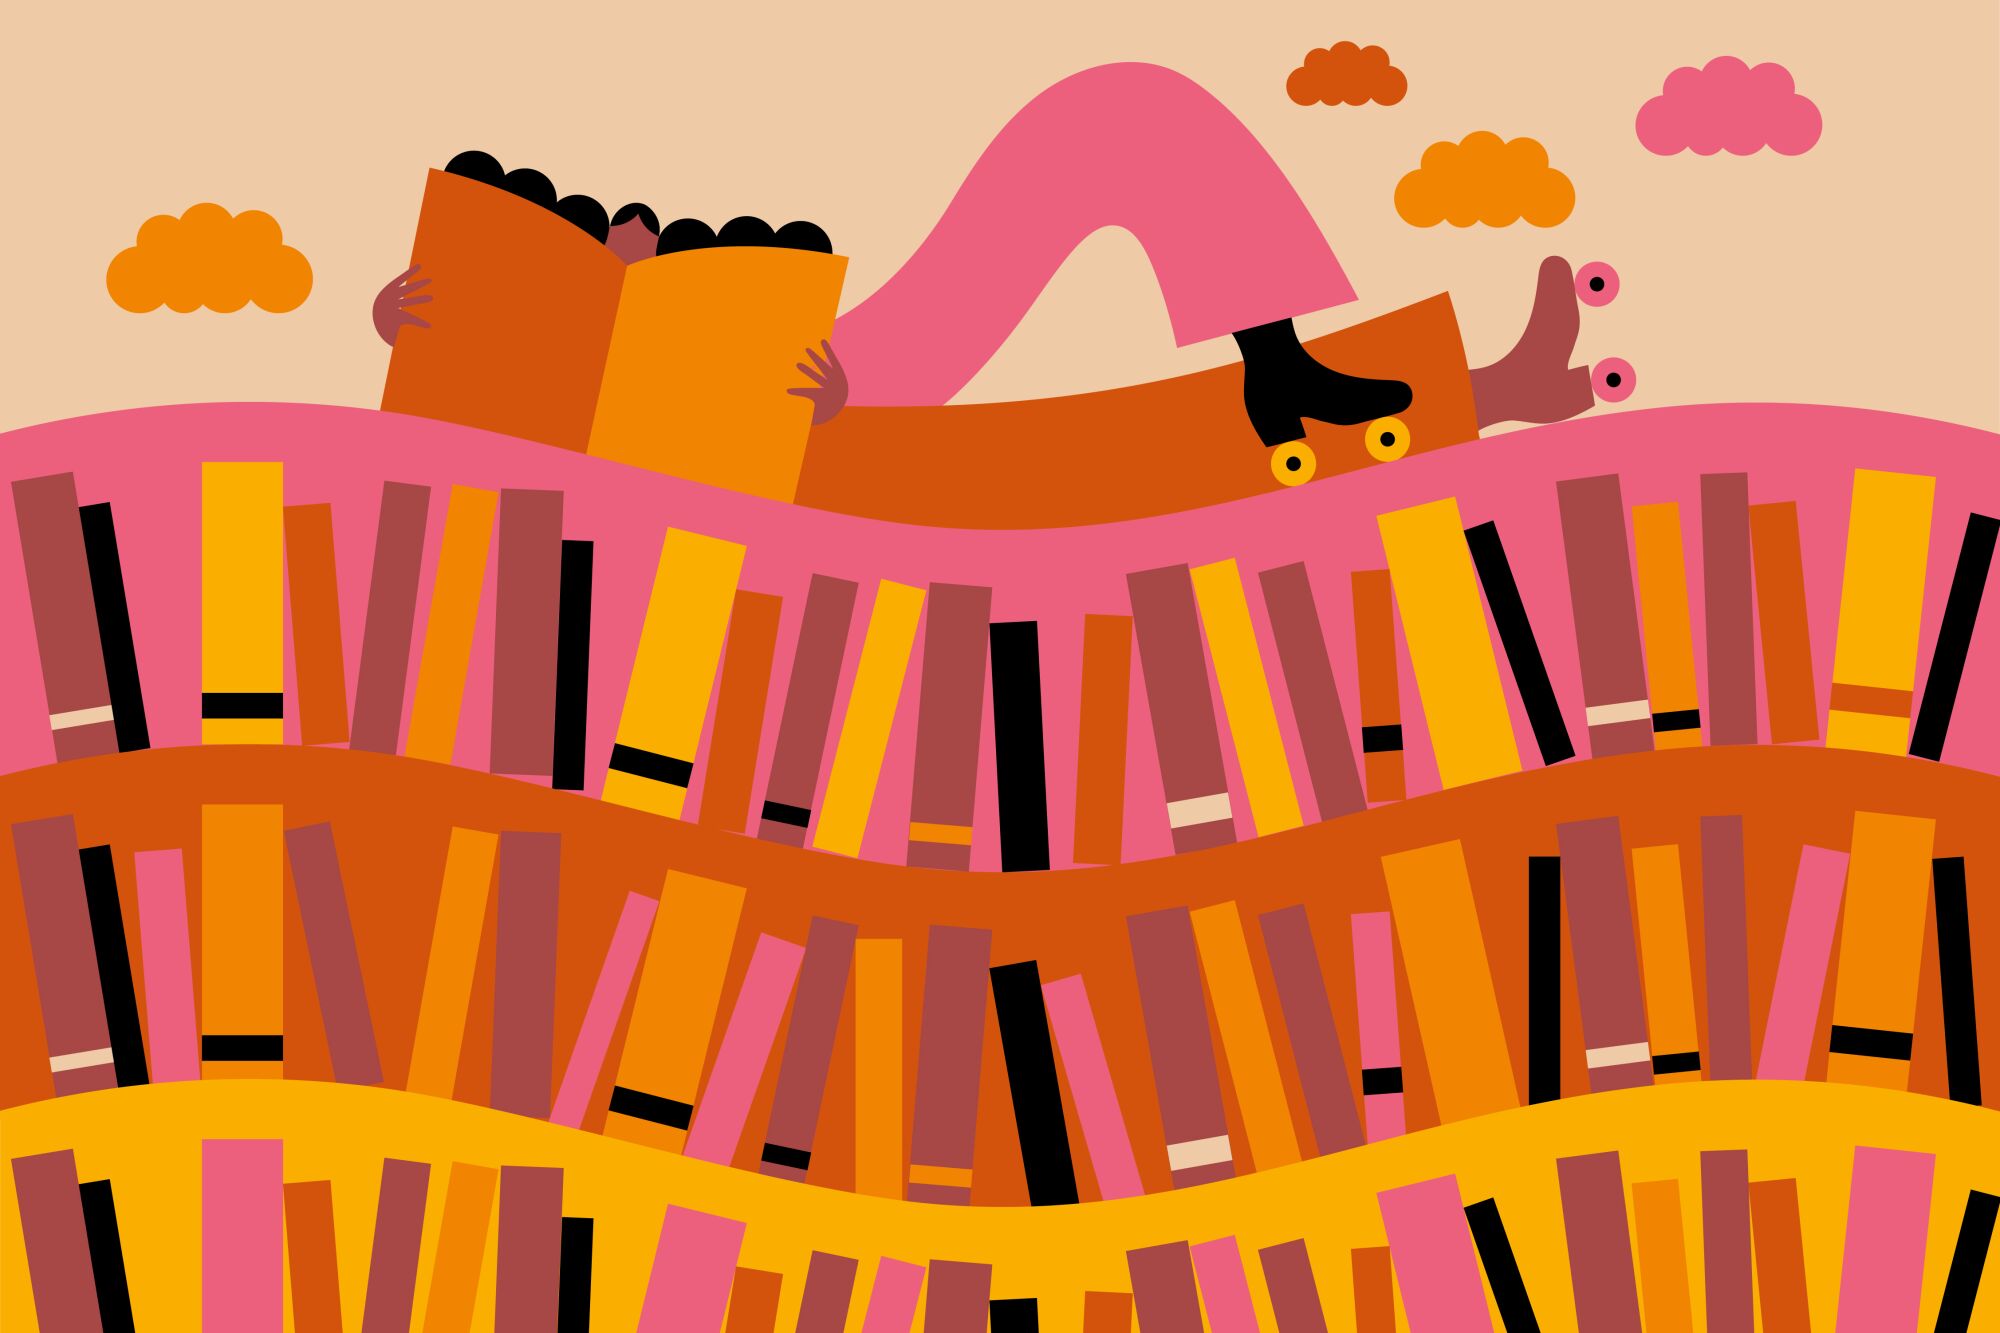 An illustration of a girl reading on a hill of books.